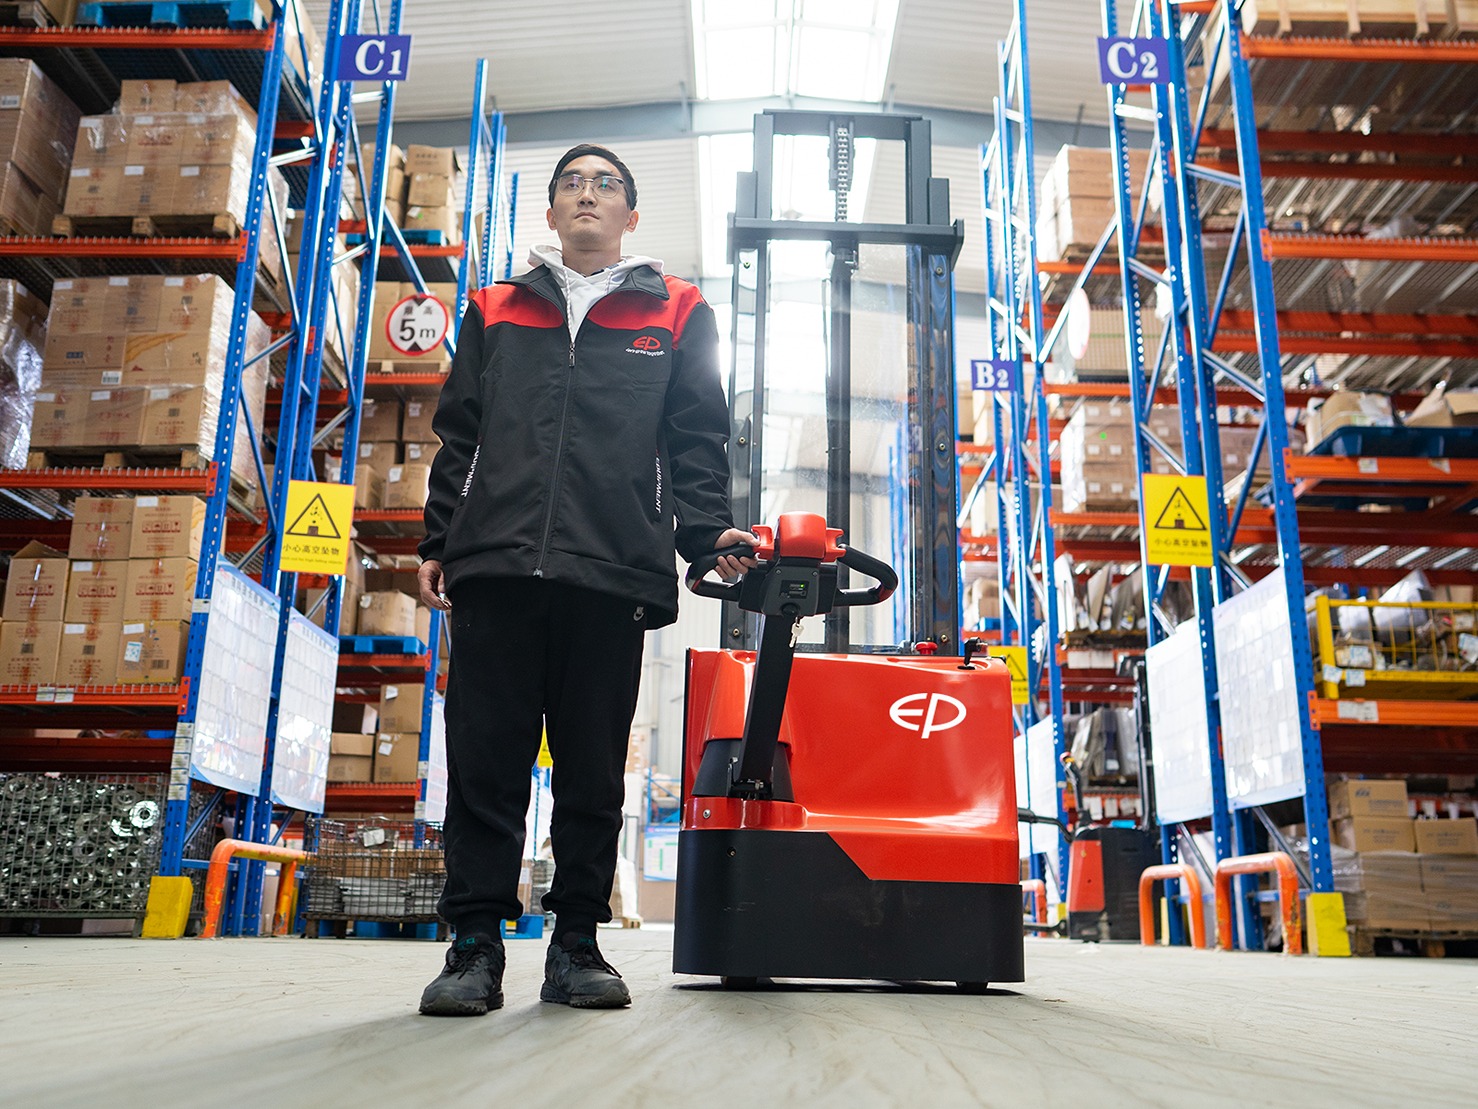 ES15-15ES electric pallet stacker being used in a warehouse.